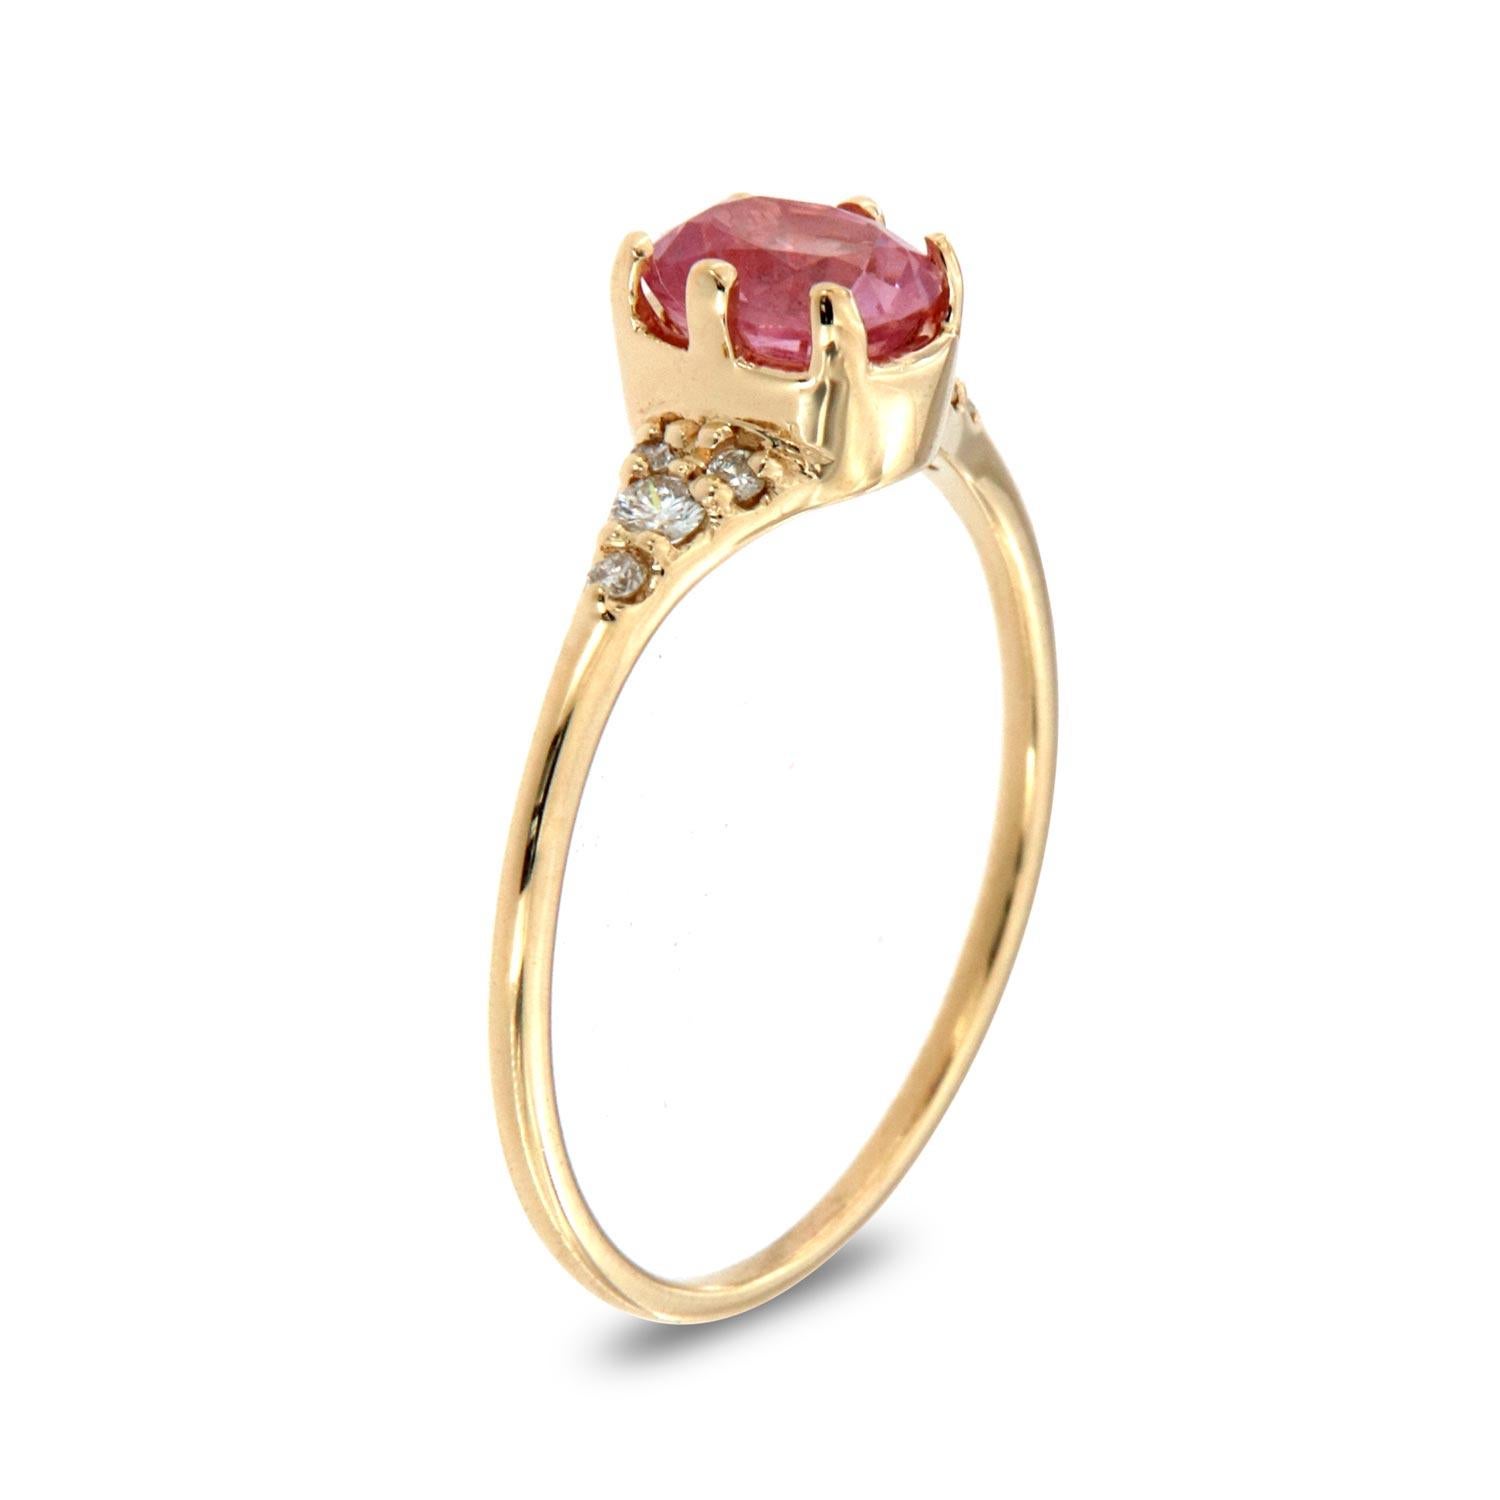 This petite rustic organic designed ring is impressive in its vintage appeal, featuring a natural pink elongated cushion shape sapphire, accented with round brilliant diamonds. Experience the difference in person!

Product details: 

Center Gemstone